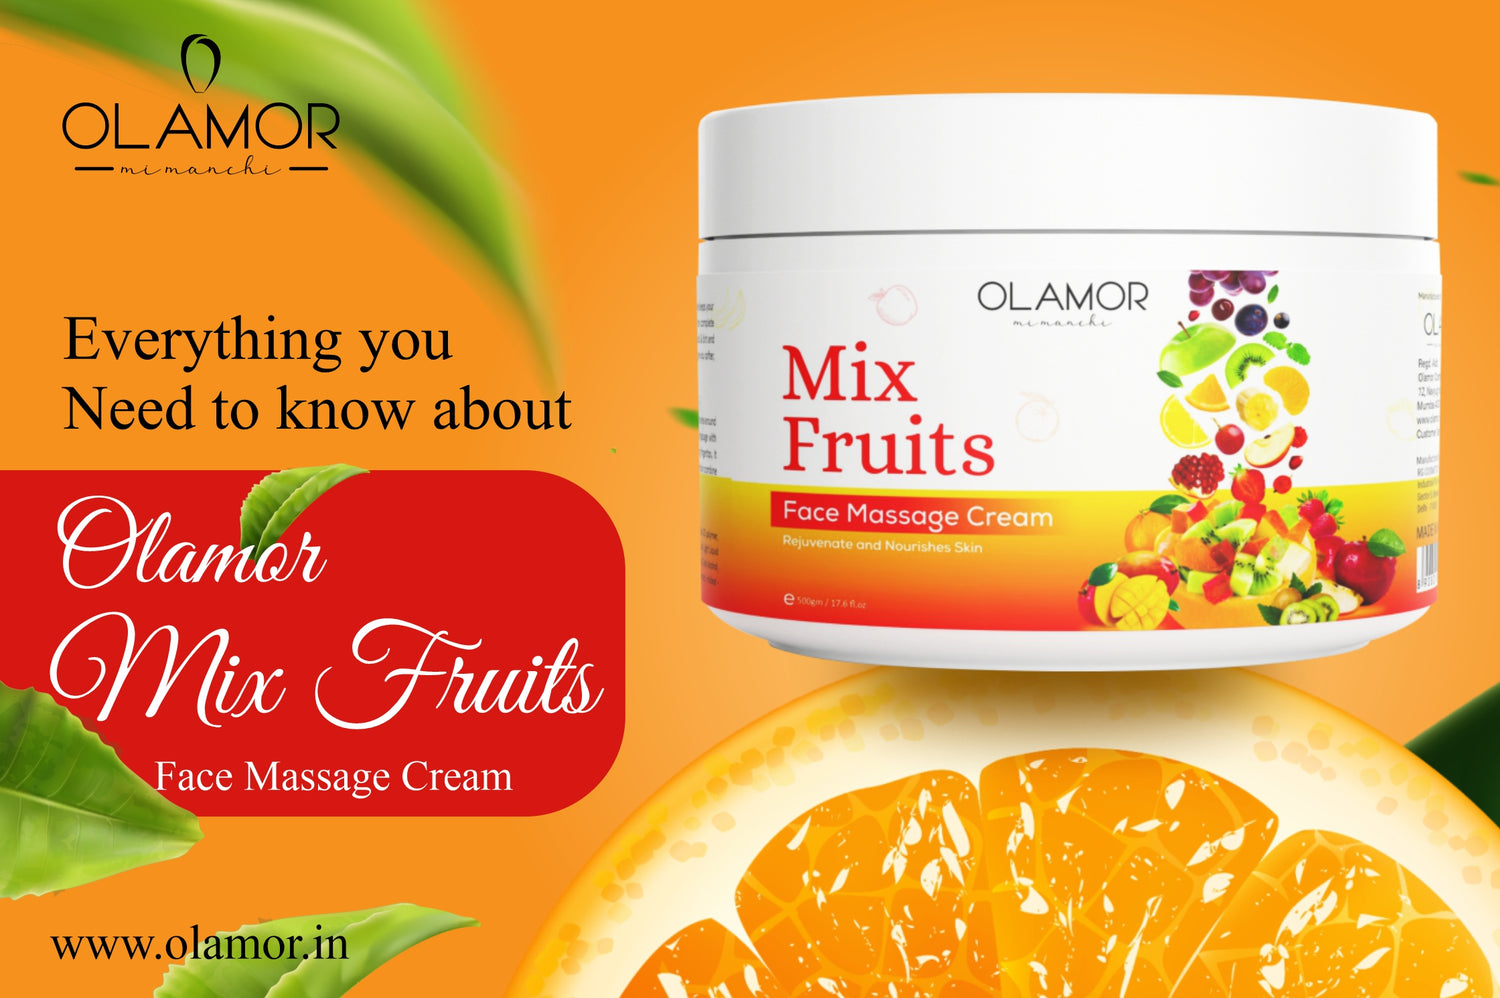 Everything You Need to Know About Olamor Mix Fruit Face Massage Cream